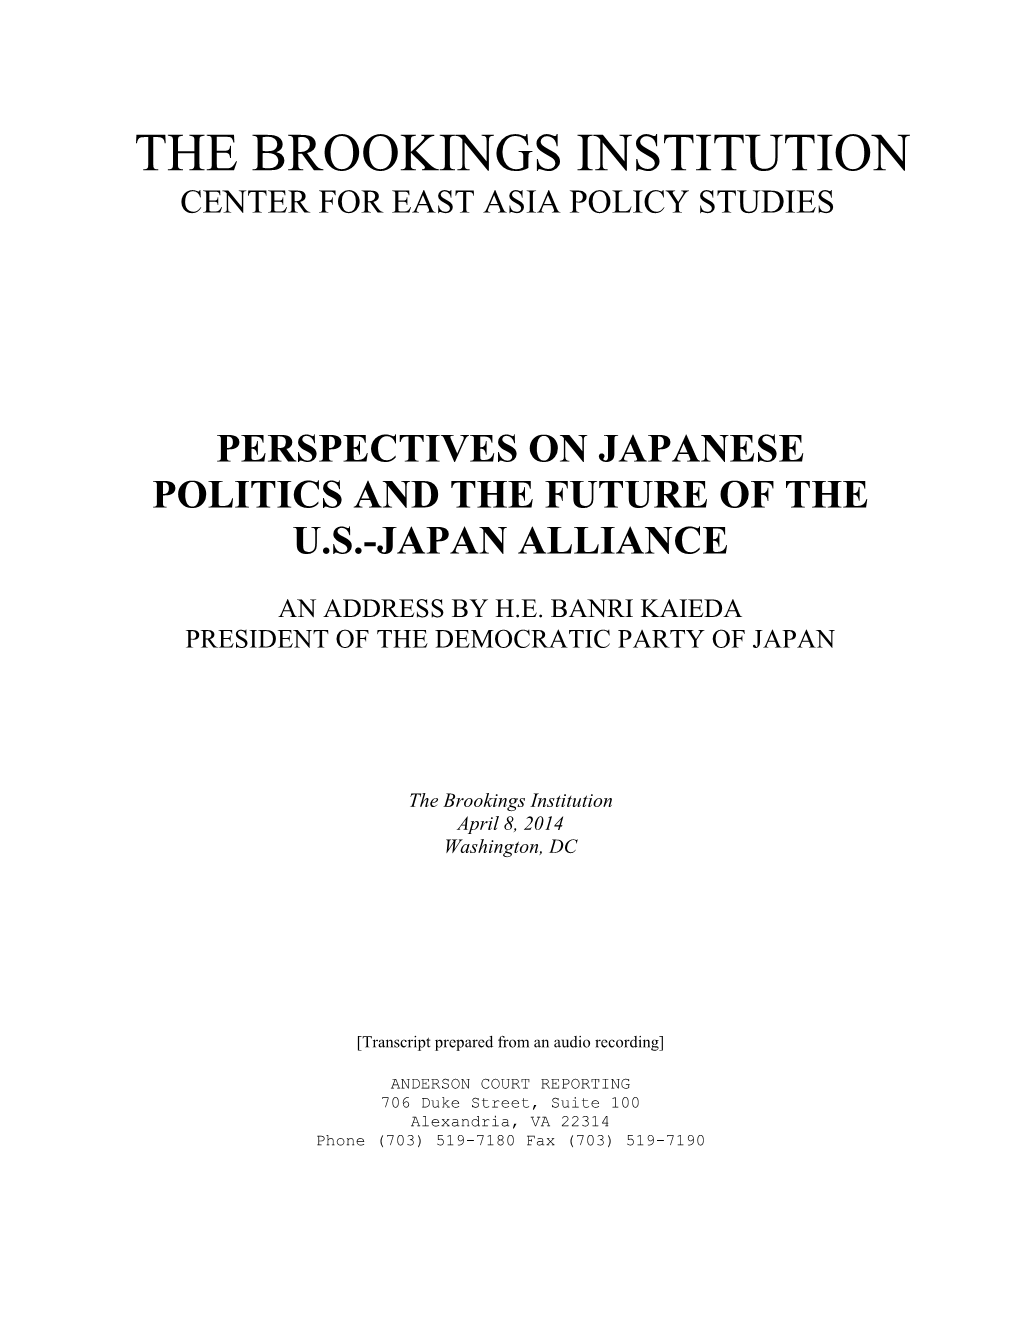 Perspectives on Japanese Politics and the Future of the U.S.-Japan Alliance